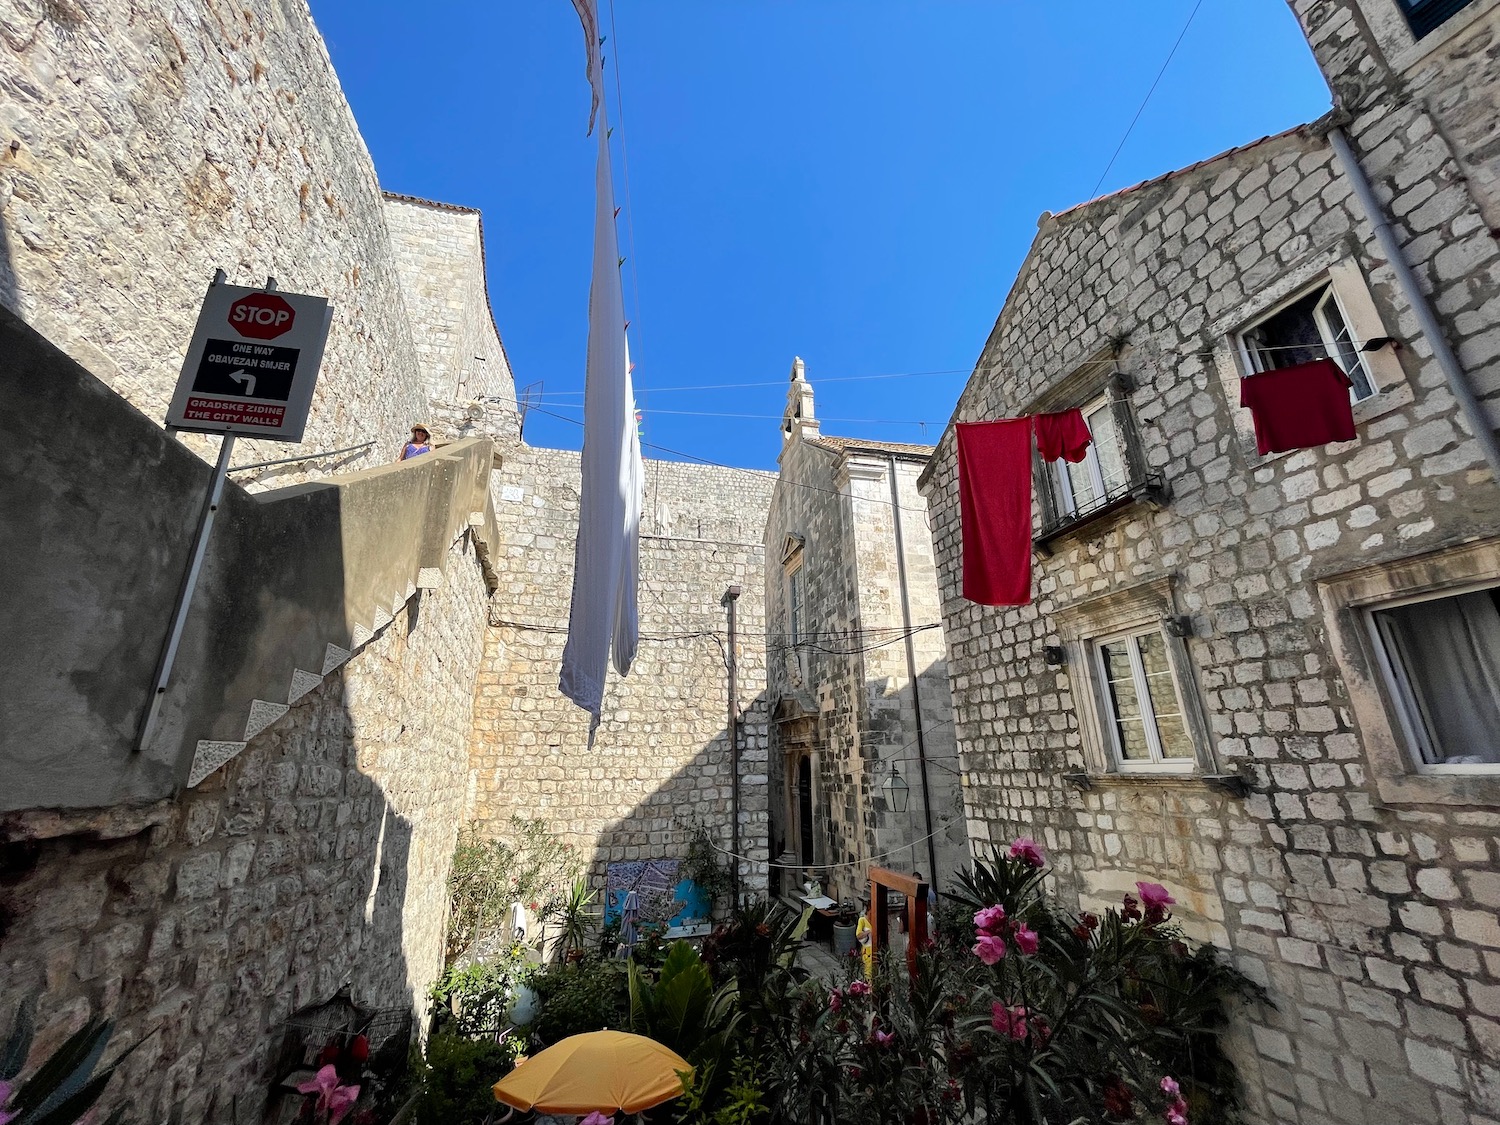 a stone buildings with laundry from the clothesline